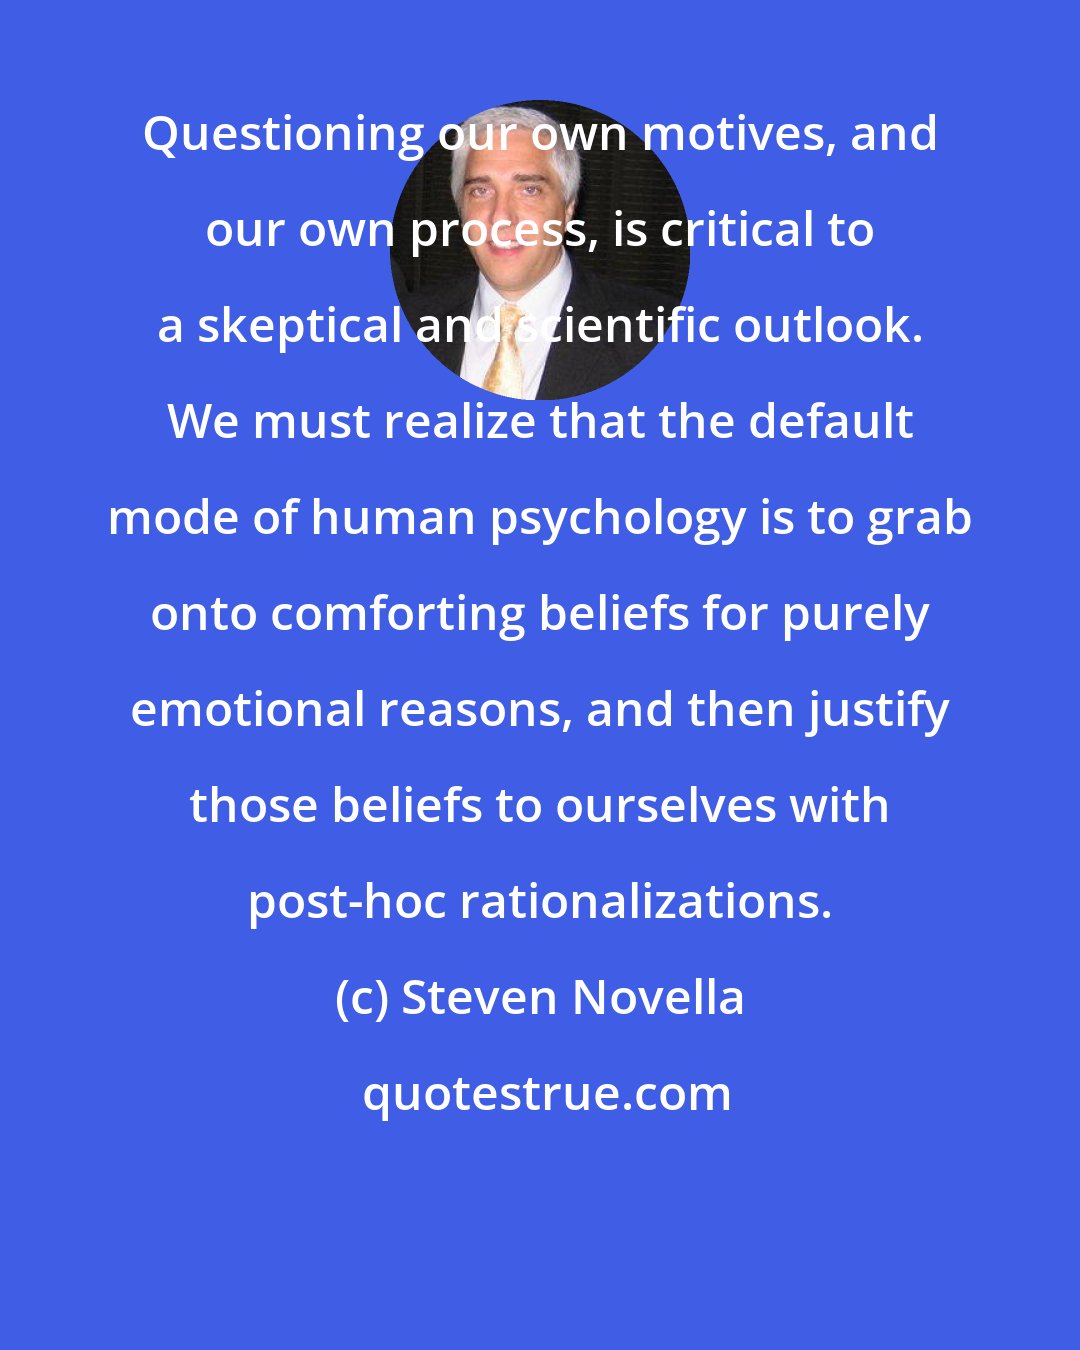 Steven Novella: Questioning our own motives, and our own process, is critical to a skeptical and scientific outlook. We must realize that the default mode of human psychology is to grab onto comforting beliefs for purely emotional reasons, and then justify those beliefs to ourselves with post-hoc rationalizations.